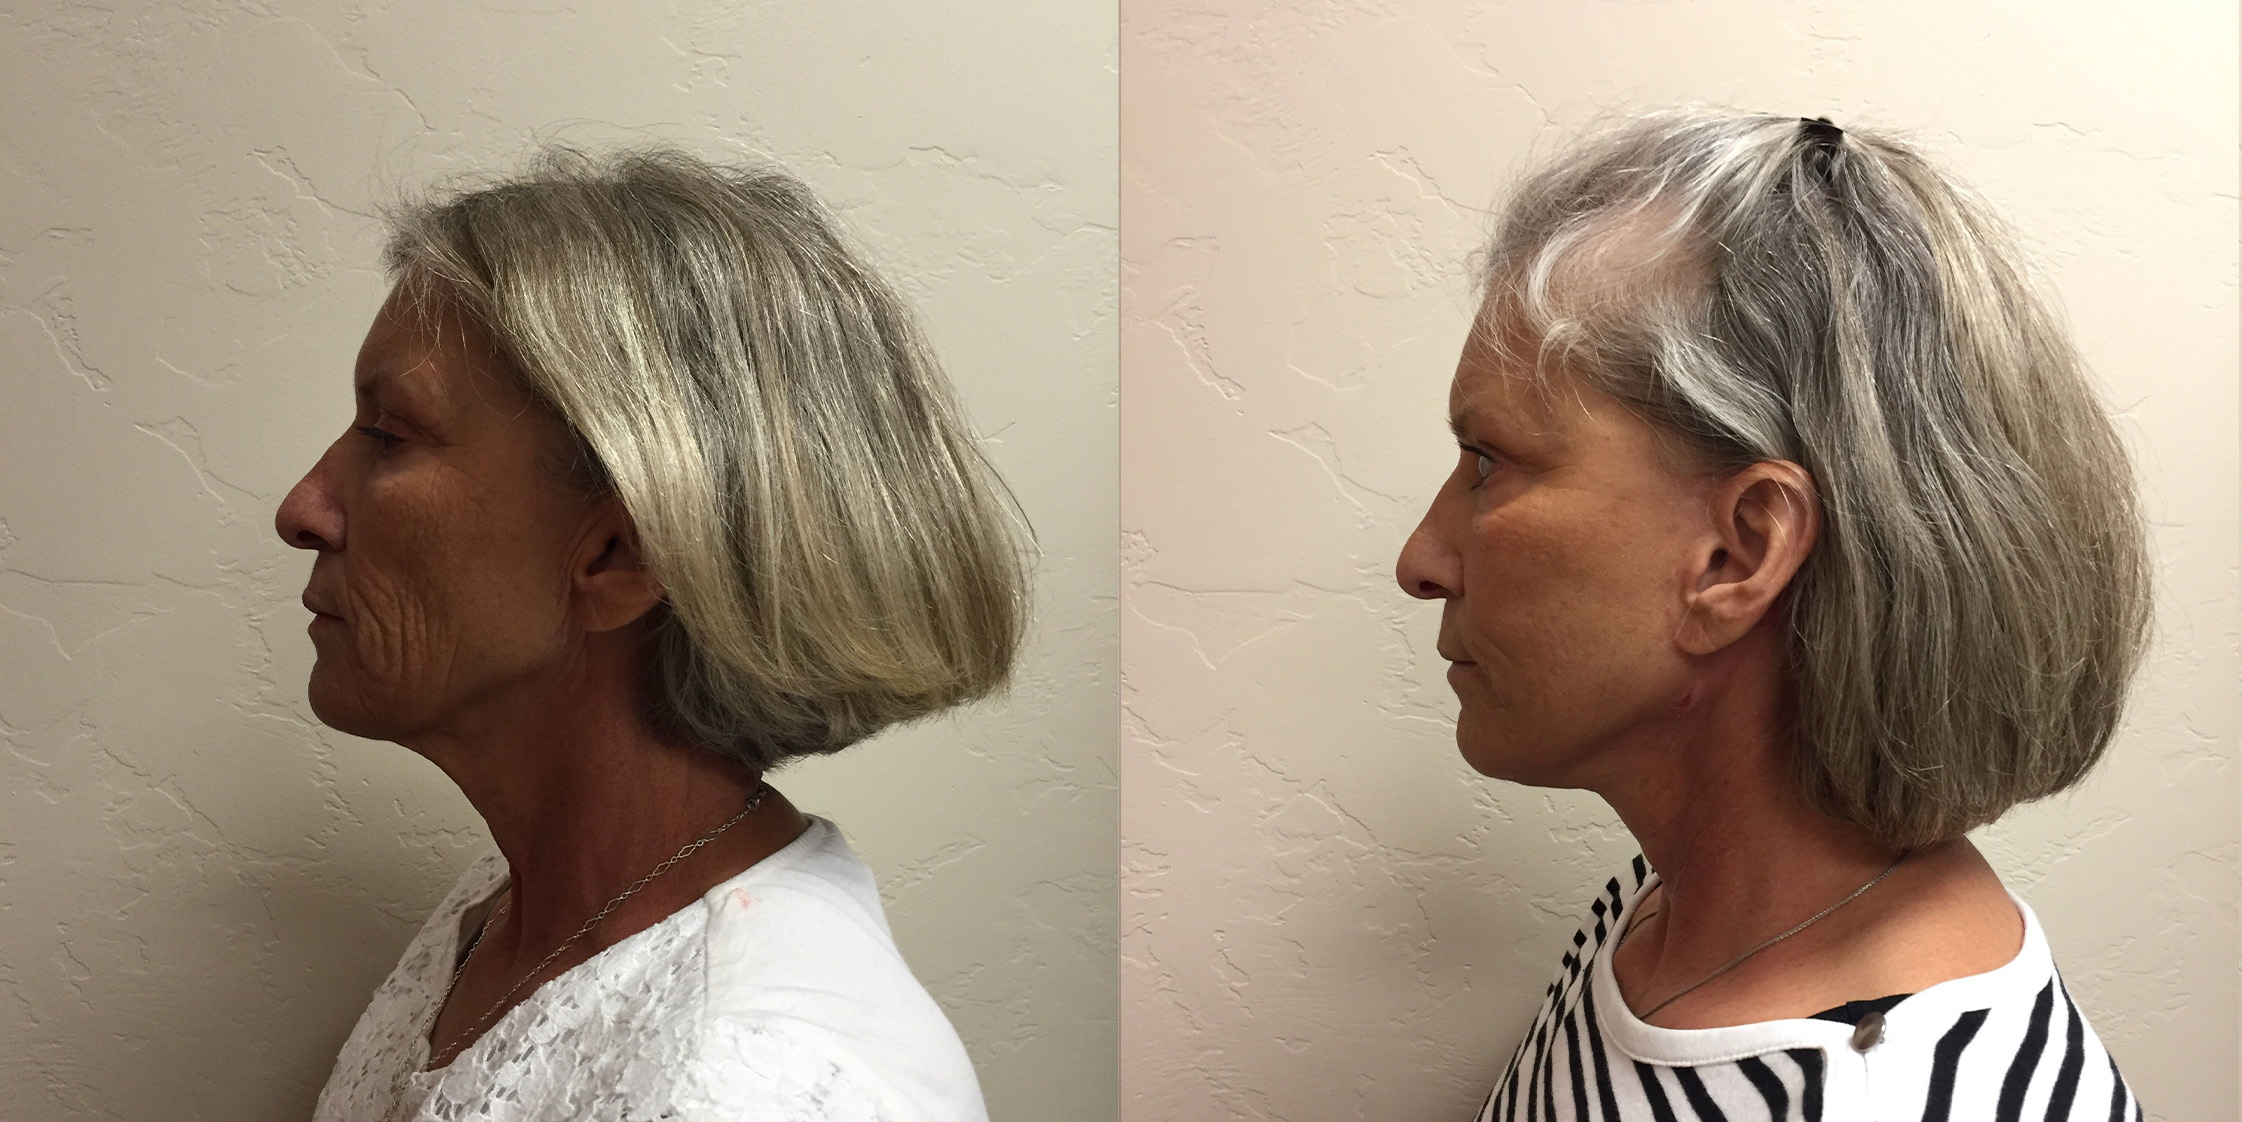 Hess-Sandeen-Facelift-Tucson-before-after2-1024x683